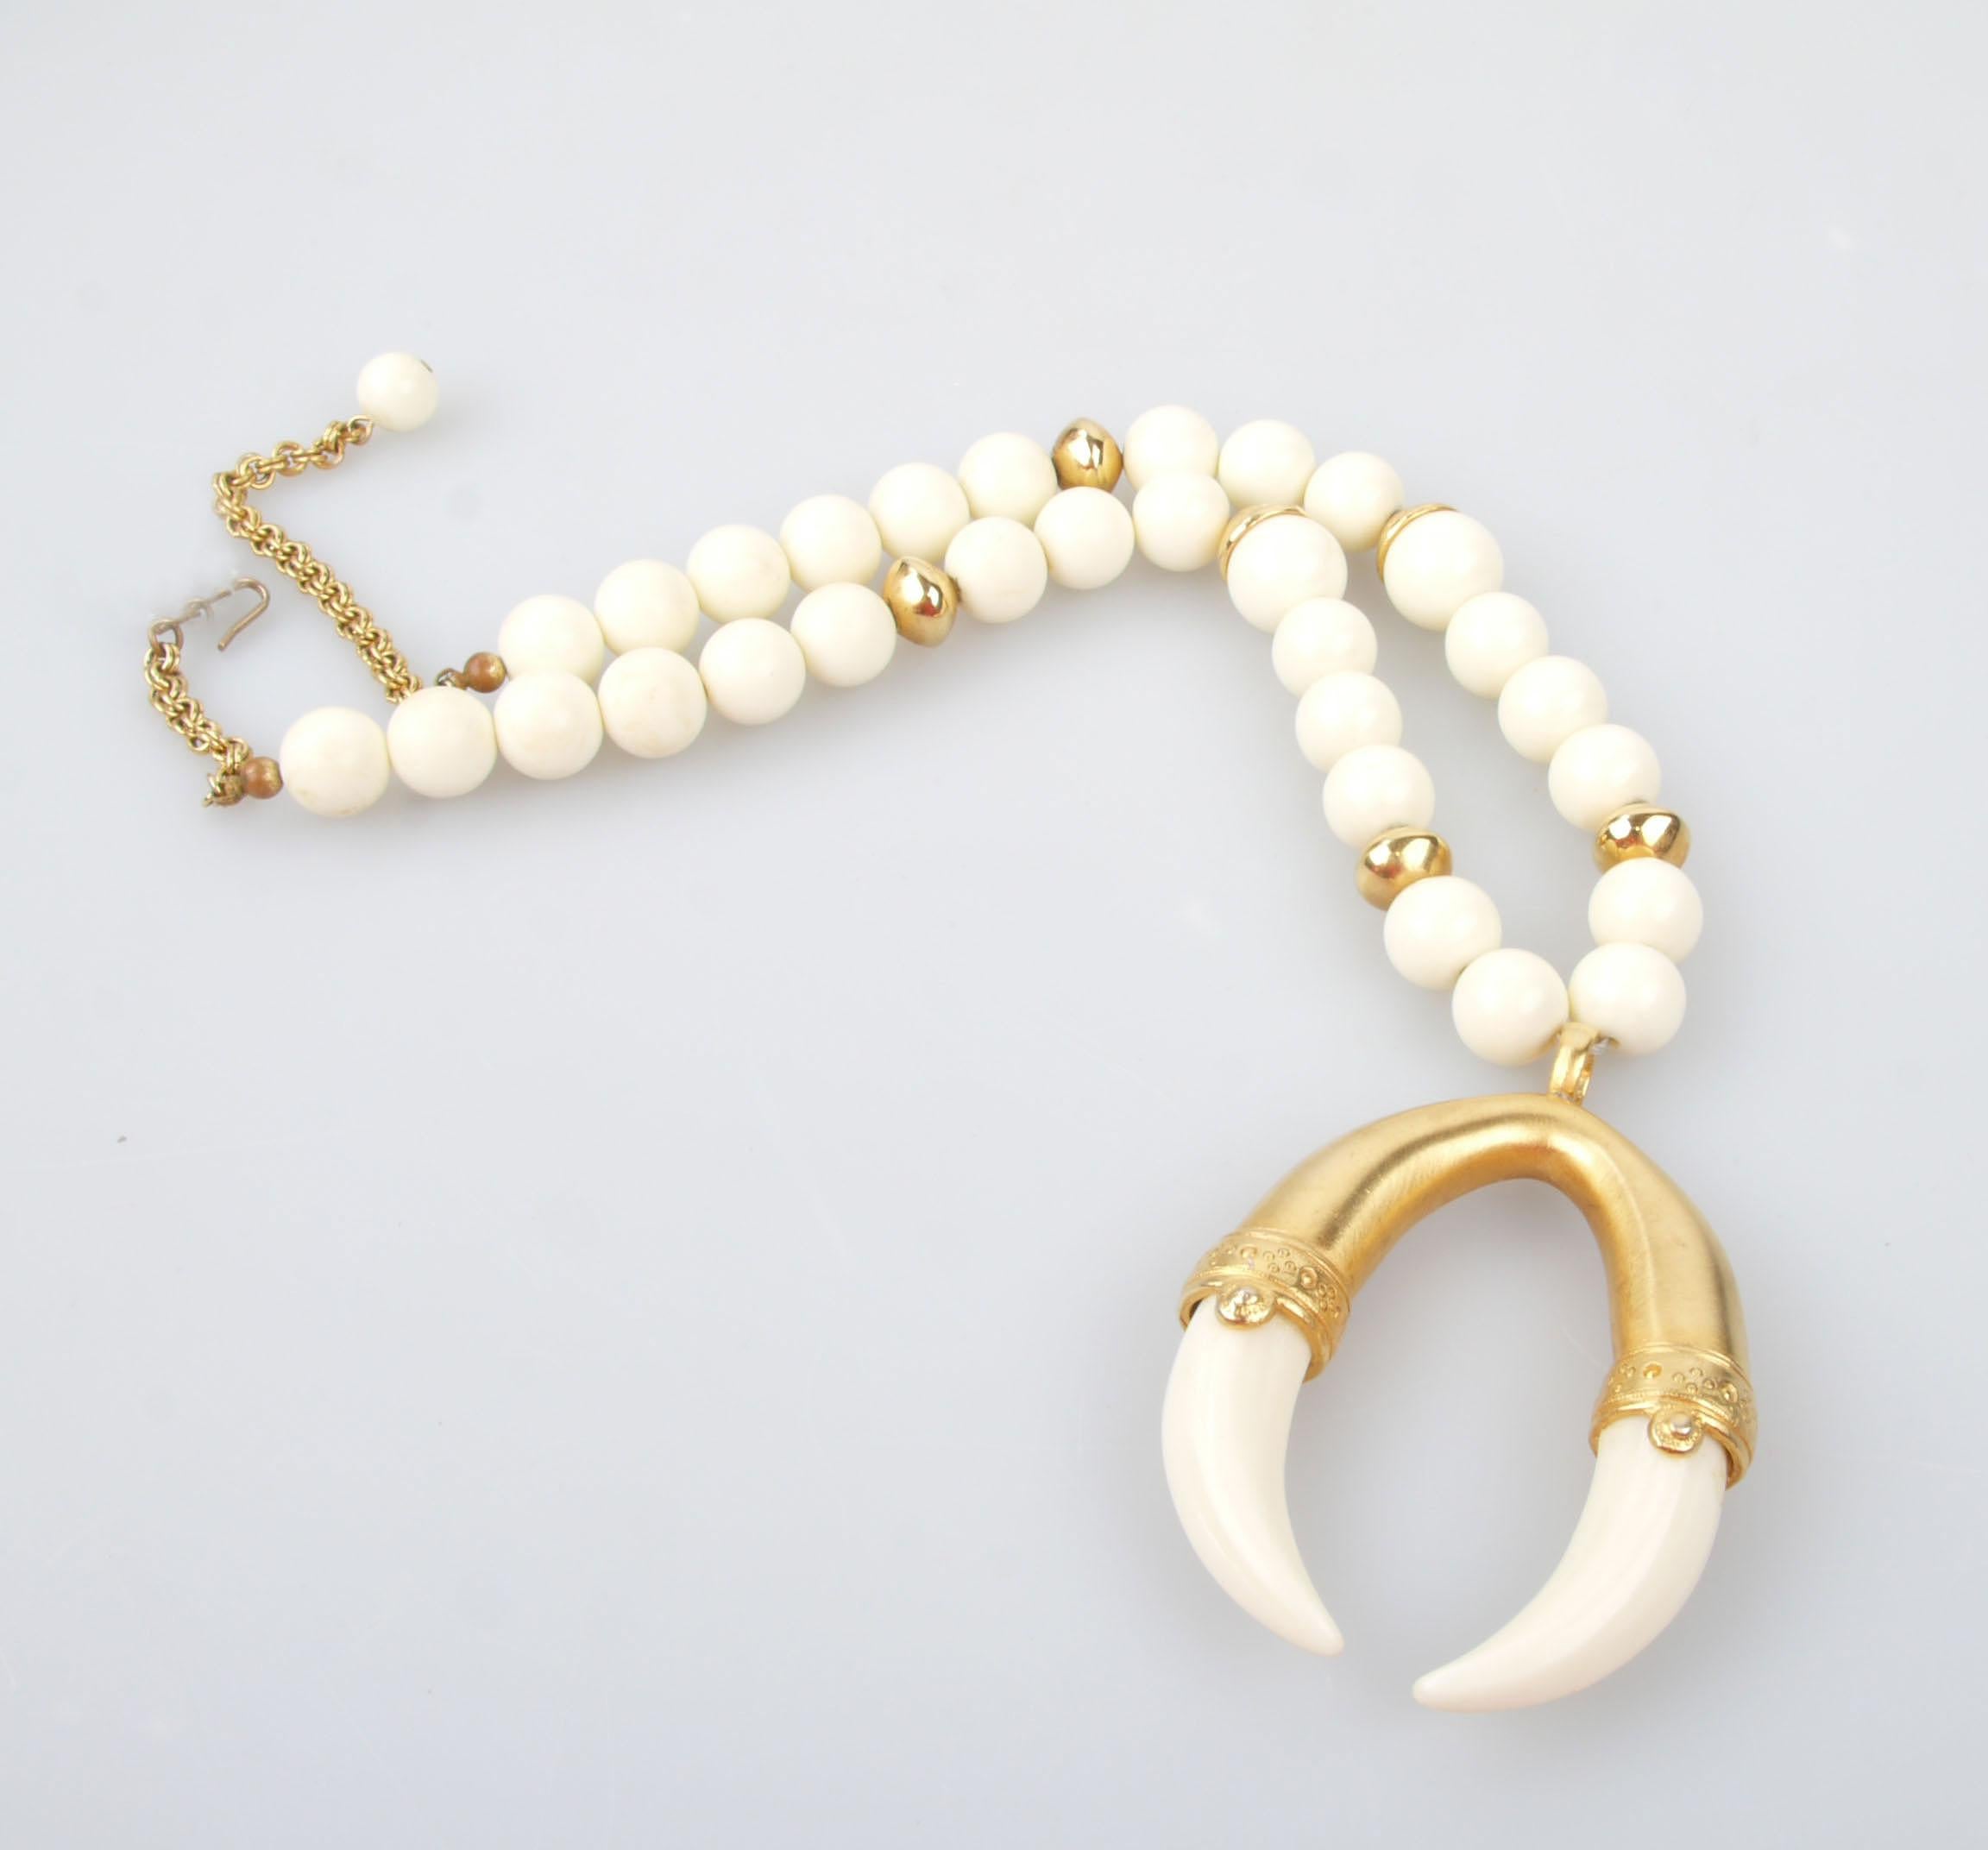 American Modern White and Golden Pearl Resin Necklace with Tusk Pendant For Sale